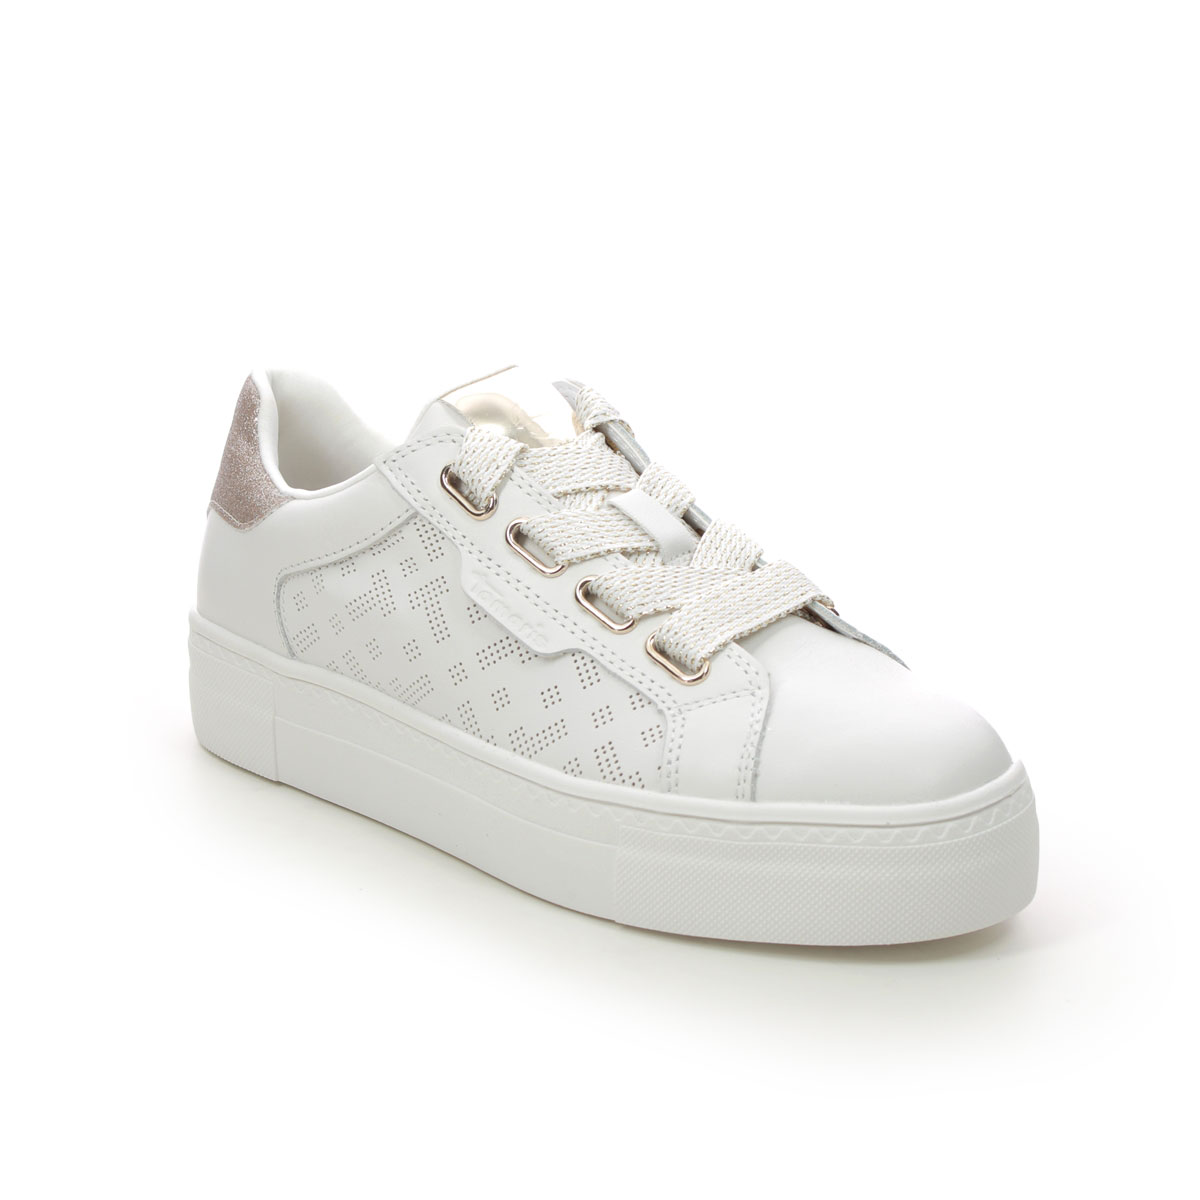 Tamaris Lima White Gold Womens Trainers 23707-20-190 In Size 38 In Plain White Gold